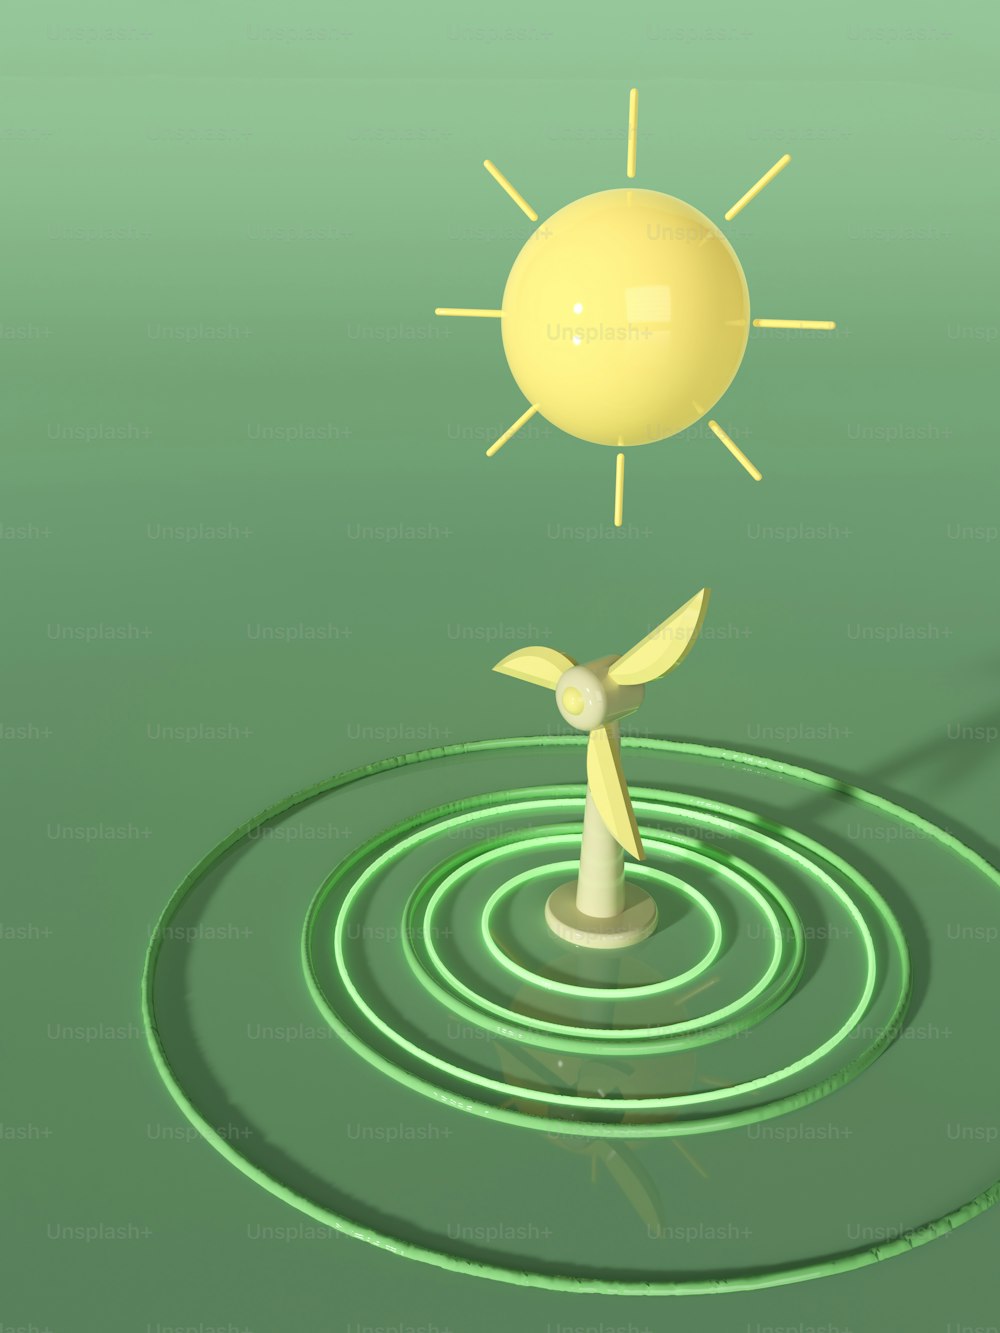 a computer generated image of a sun and a wind turbine